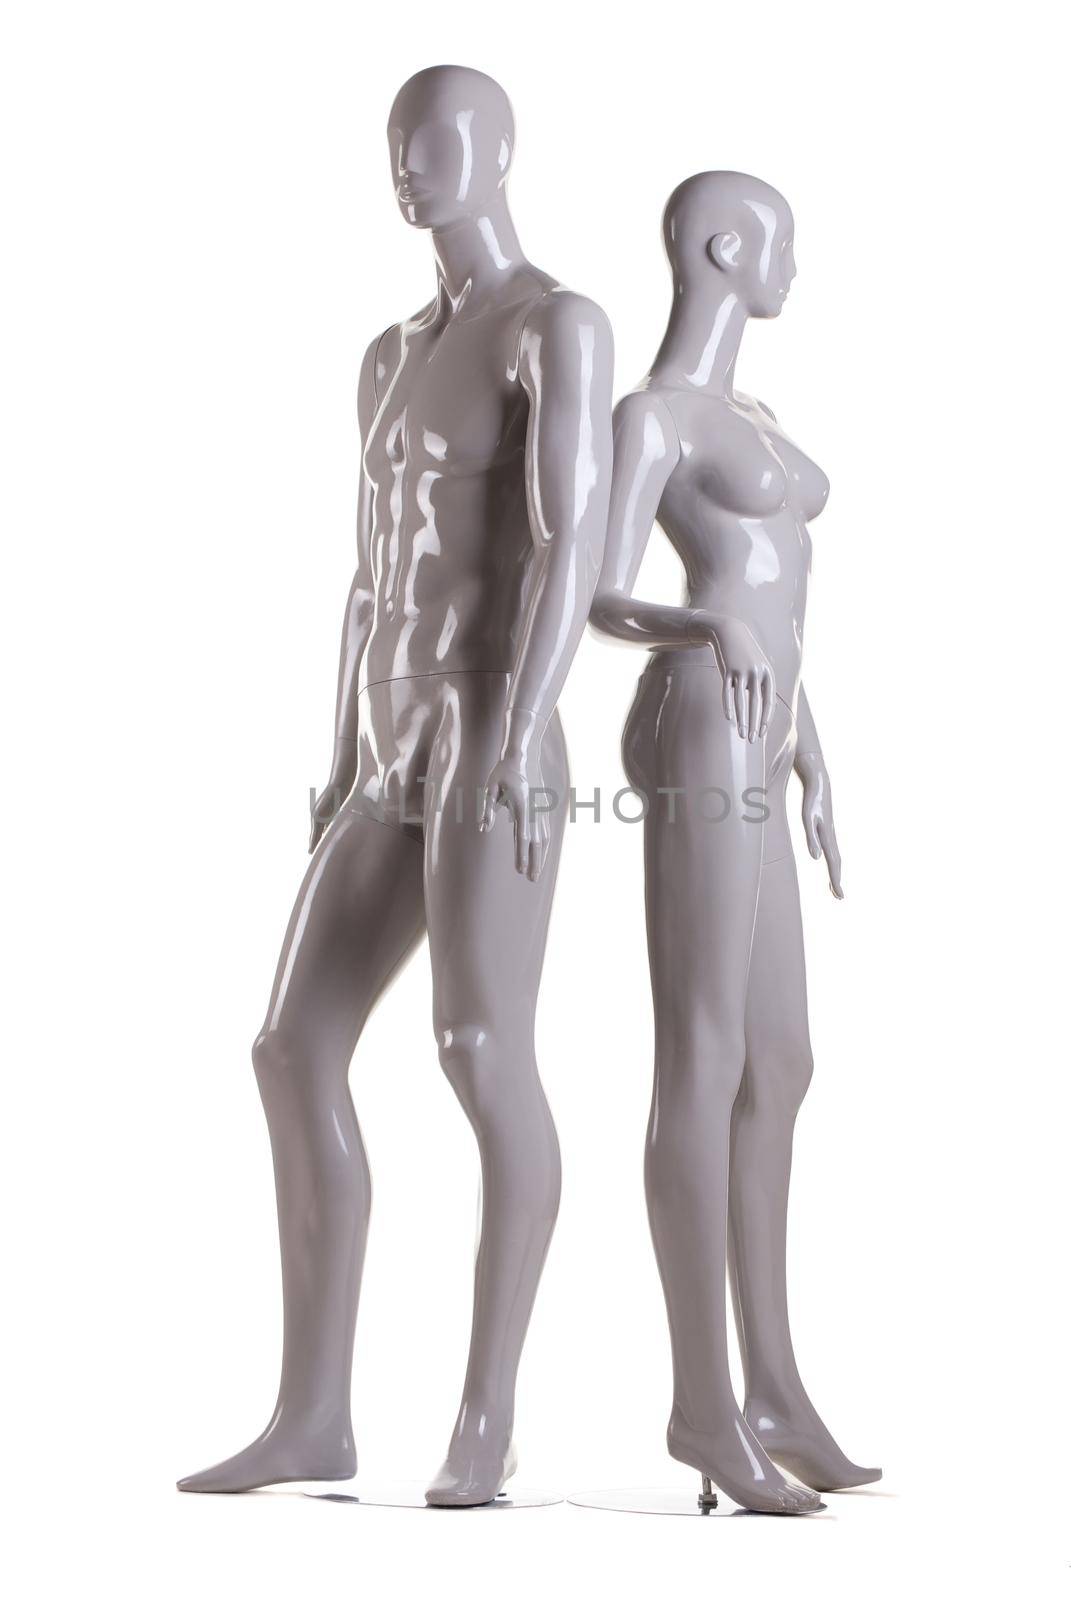 male and a female mannequin on white background by Julenochek